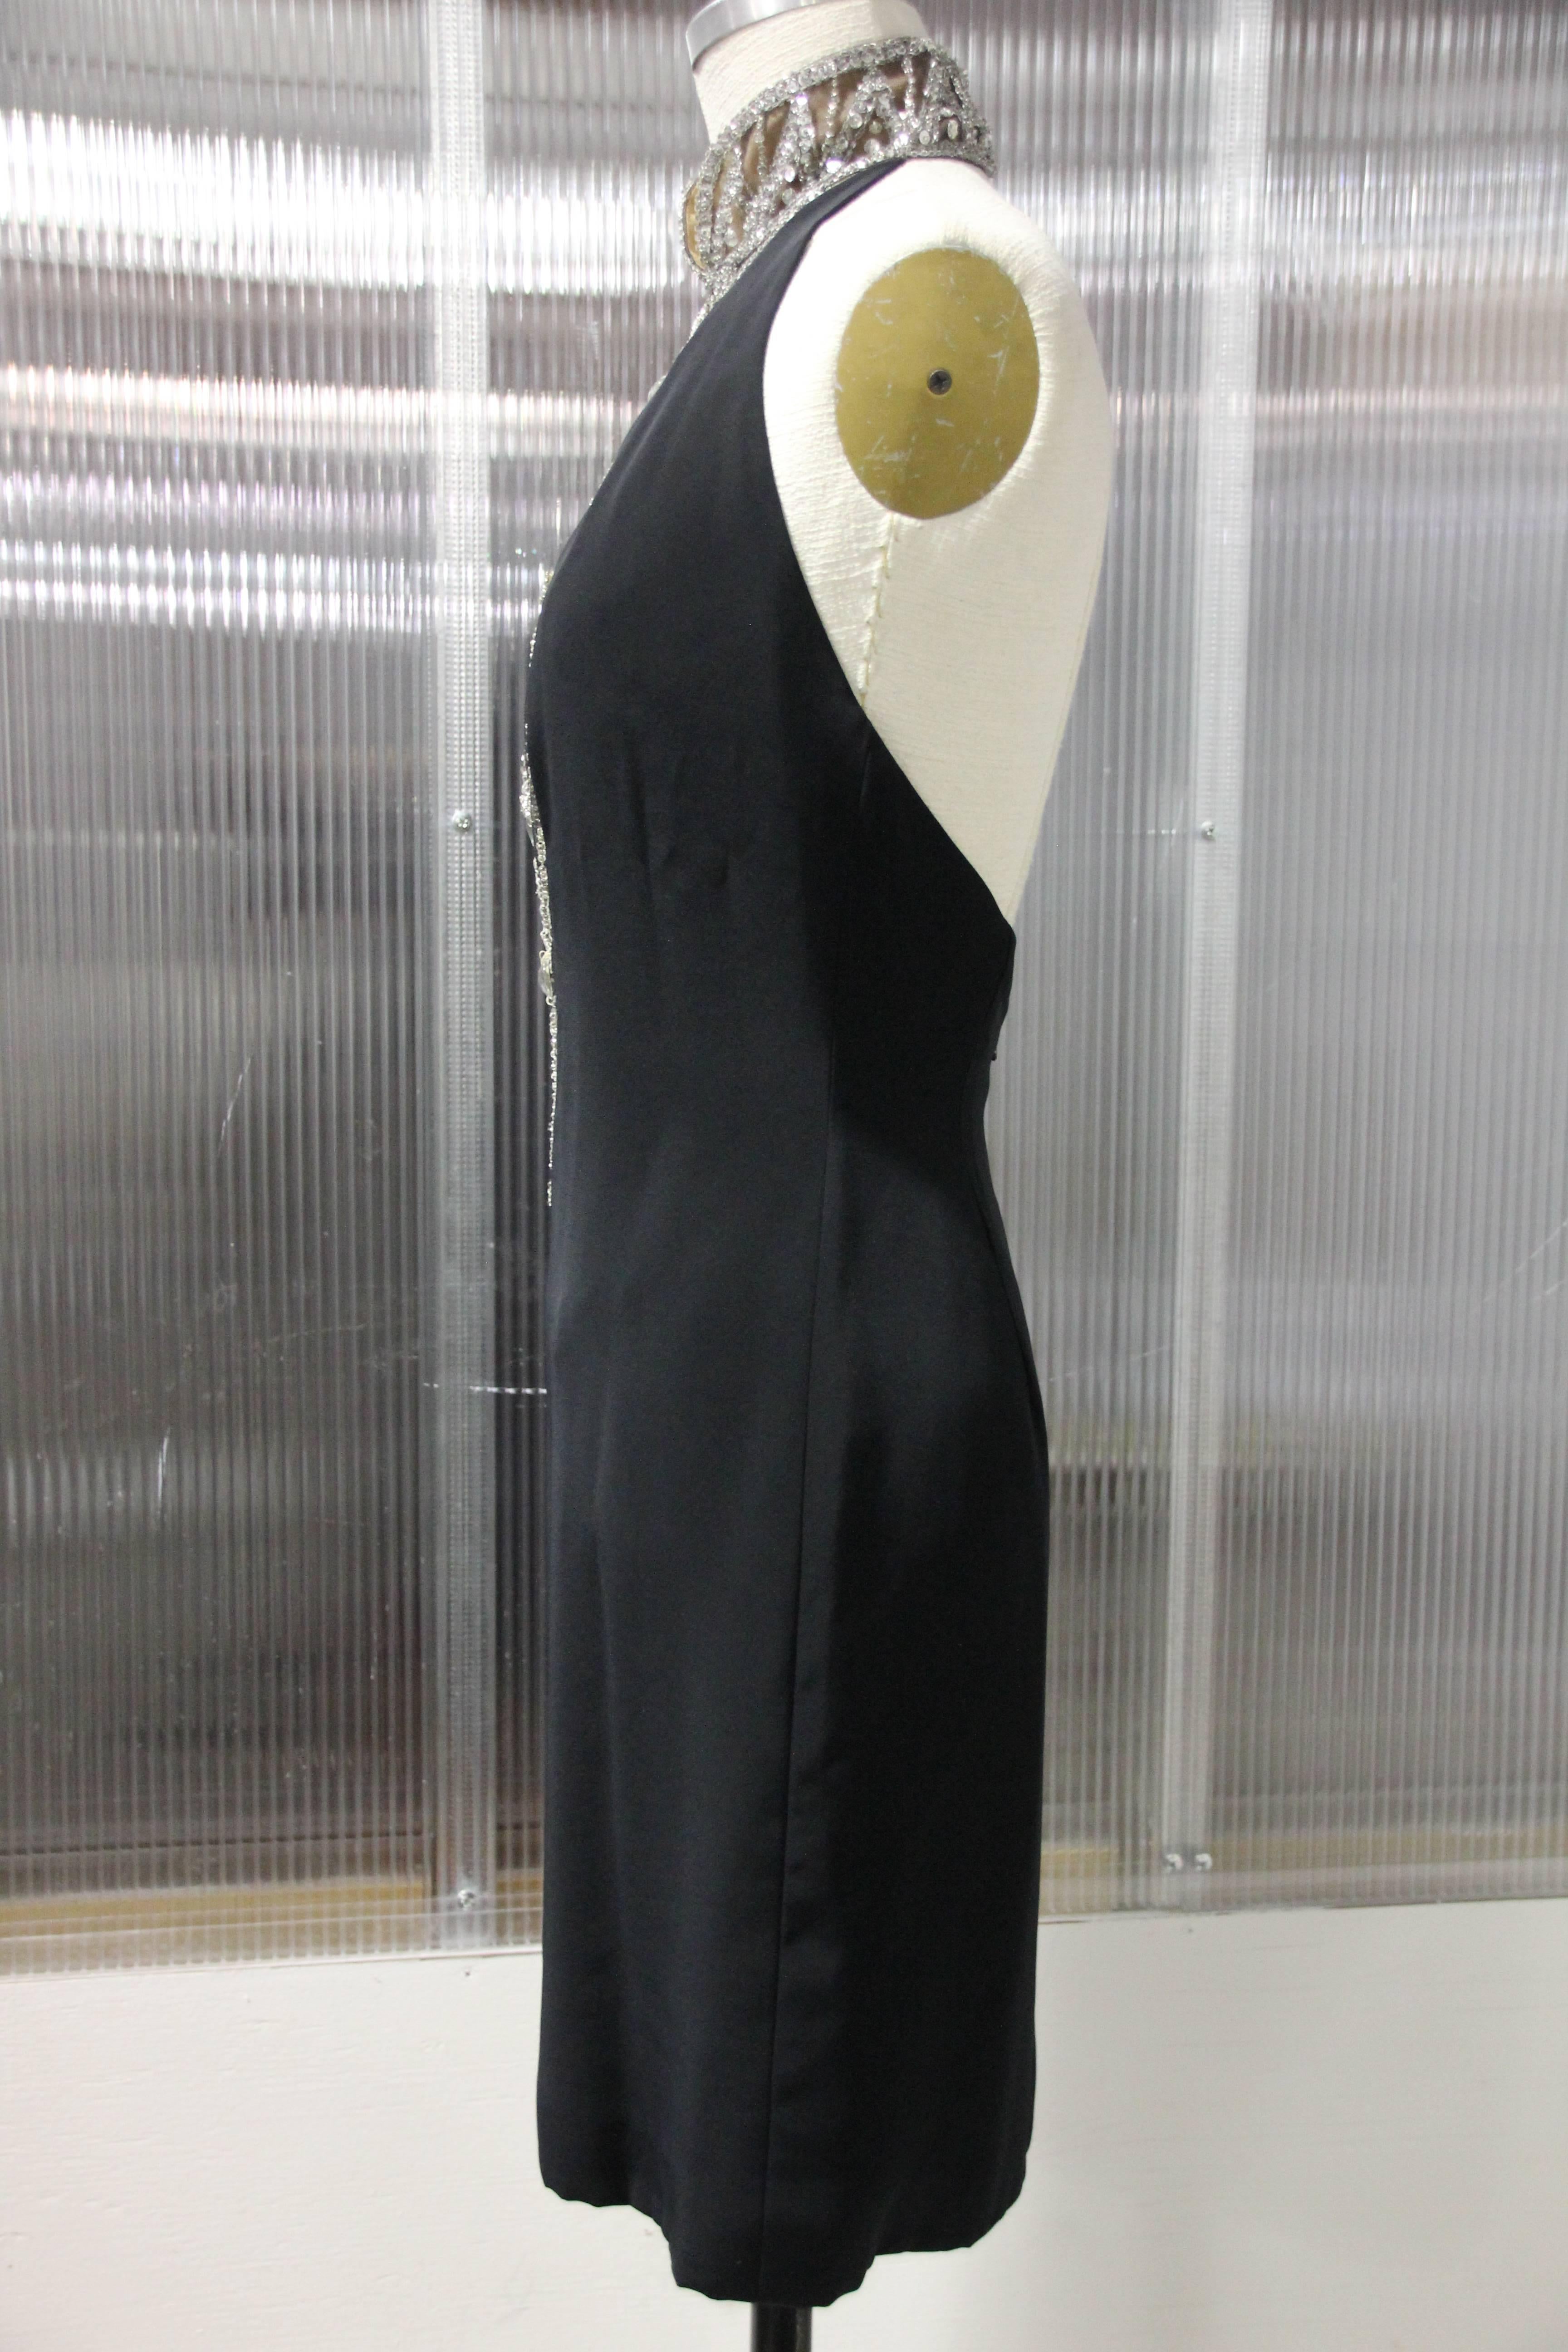 1980s Bob Mackie silk crepe little black mini dress w nude illusion decolletage embellished in Art Deco -styled rhinestones.  Low-cut back with zipper. Lined. 